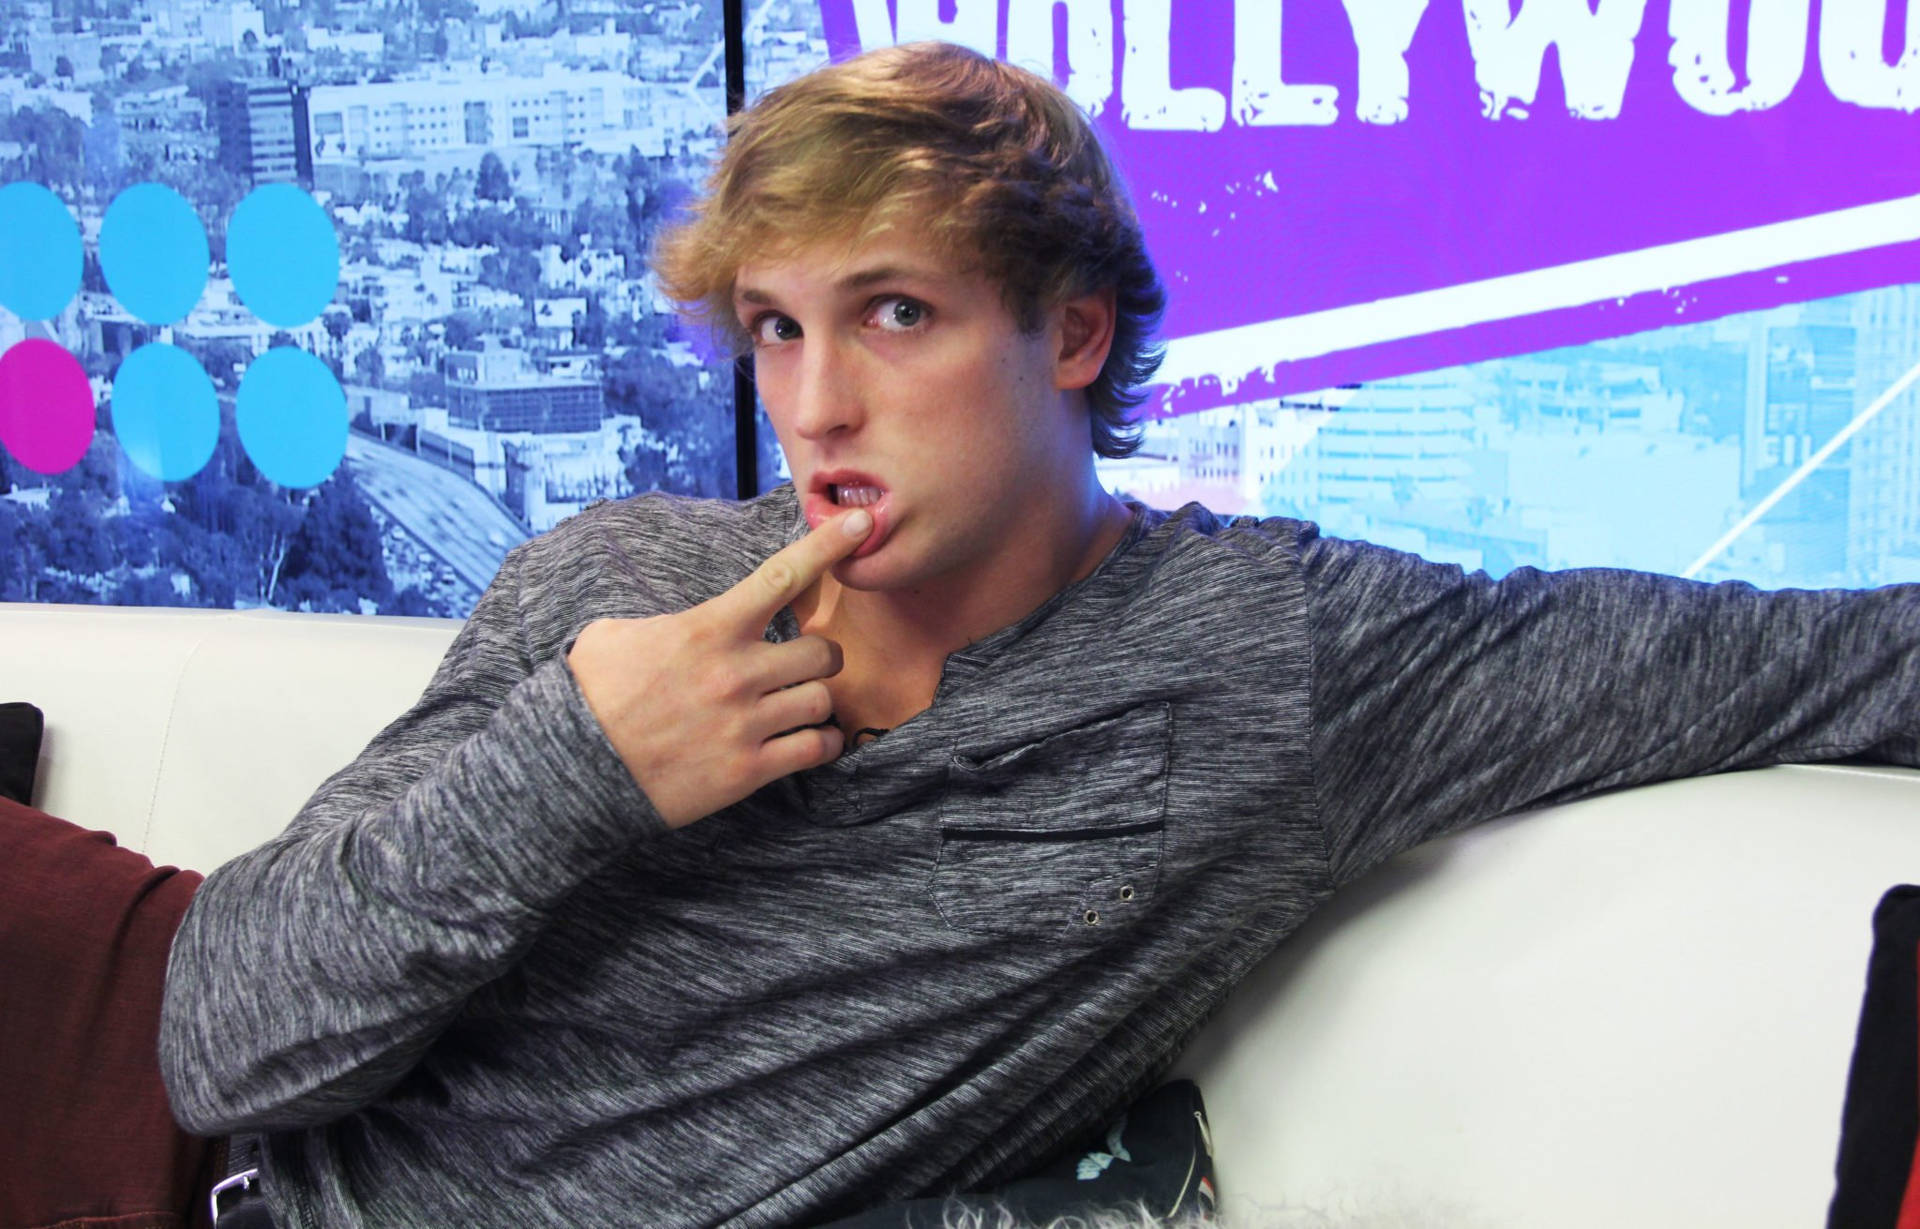 Logan Paul Being Witty And Playful Background